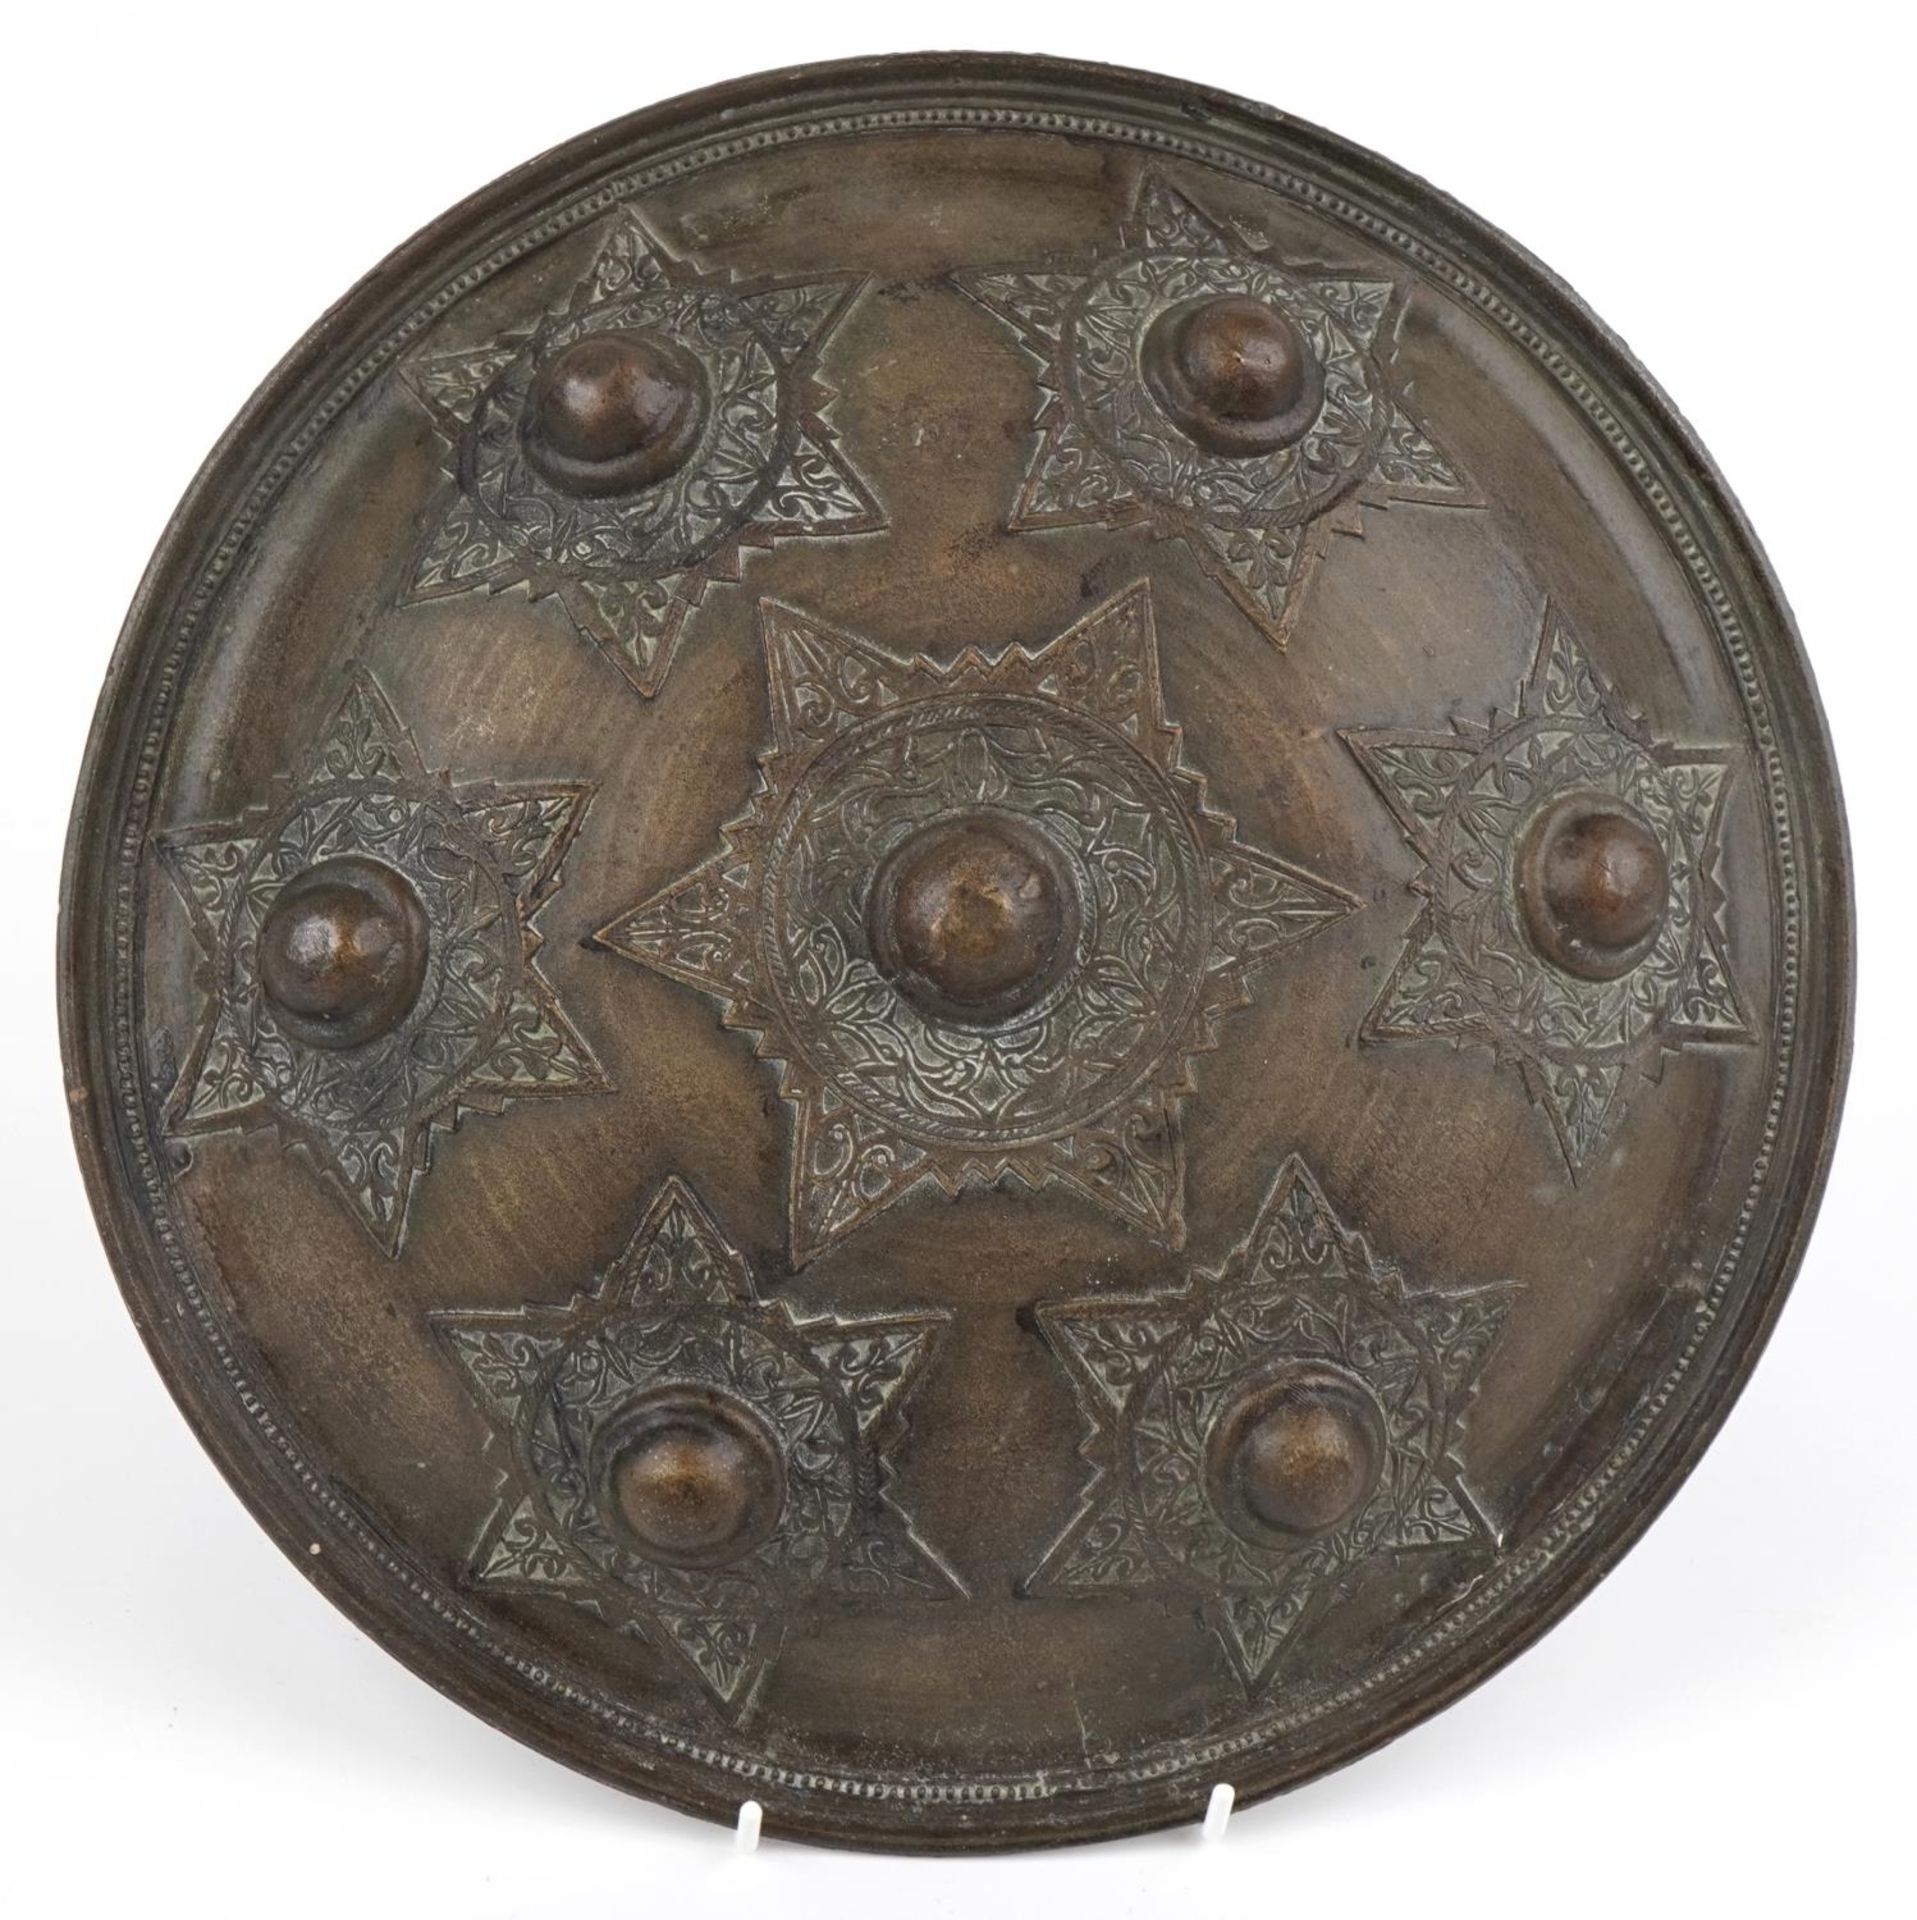 Indo-Persian bronze Dhal shield with star motifs, 31.5cm in diameter : For further information on